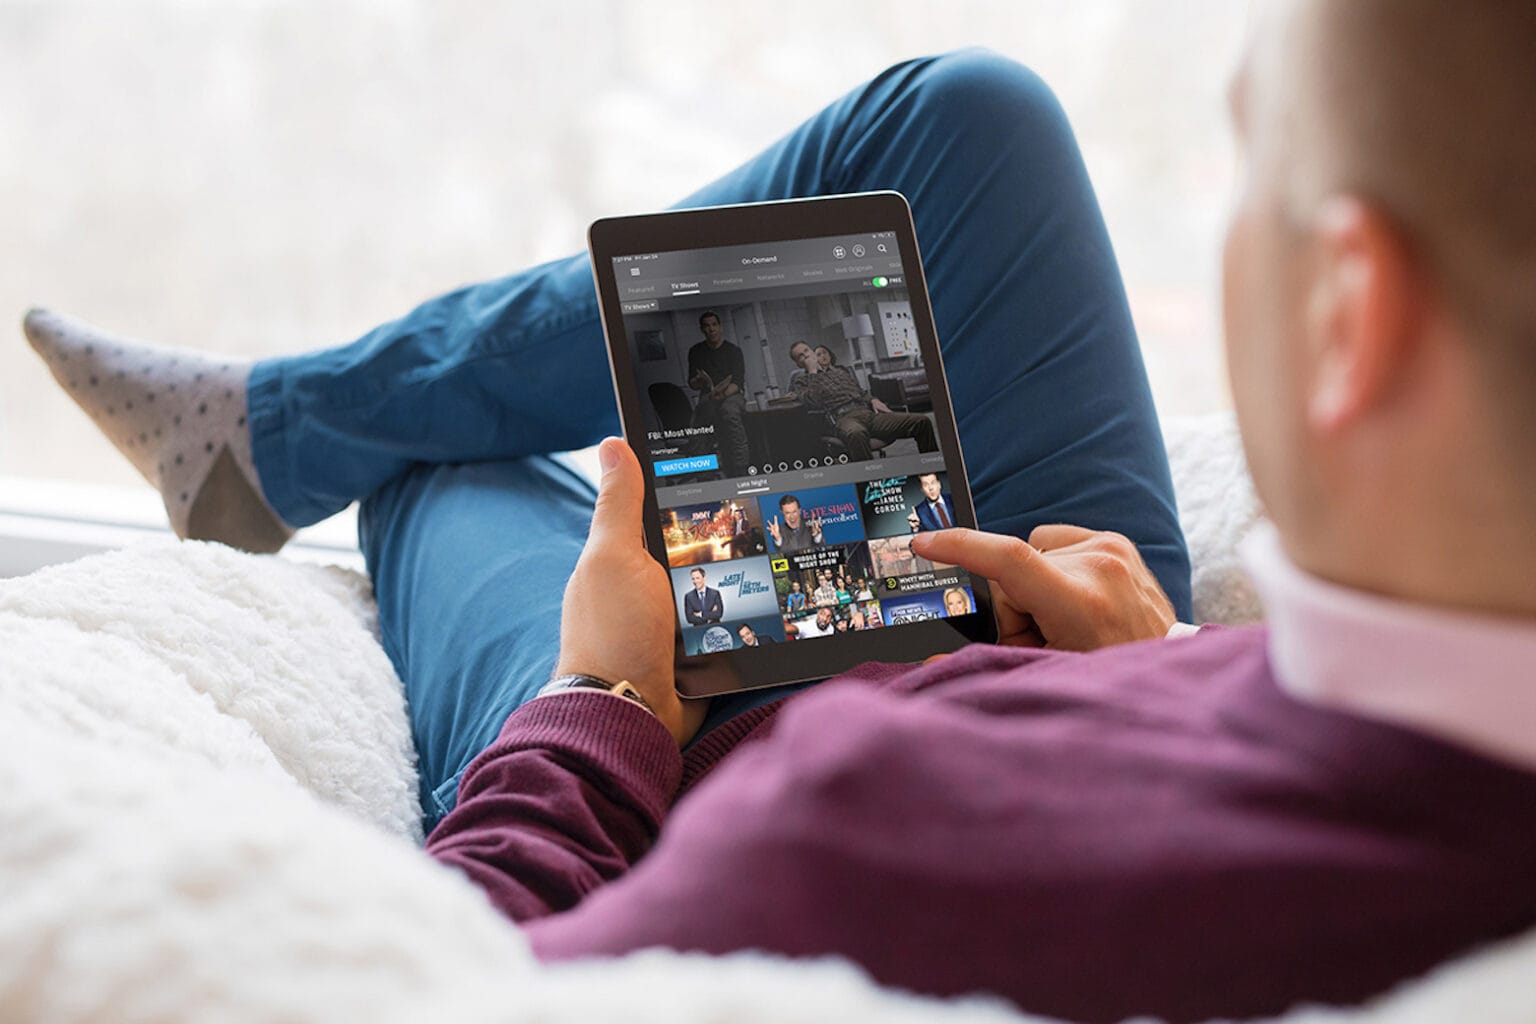 Spend less time scrolling and more time watching with this smart TV app.